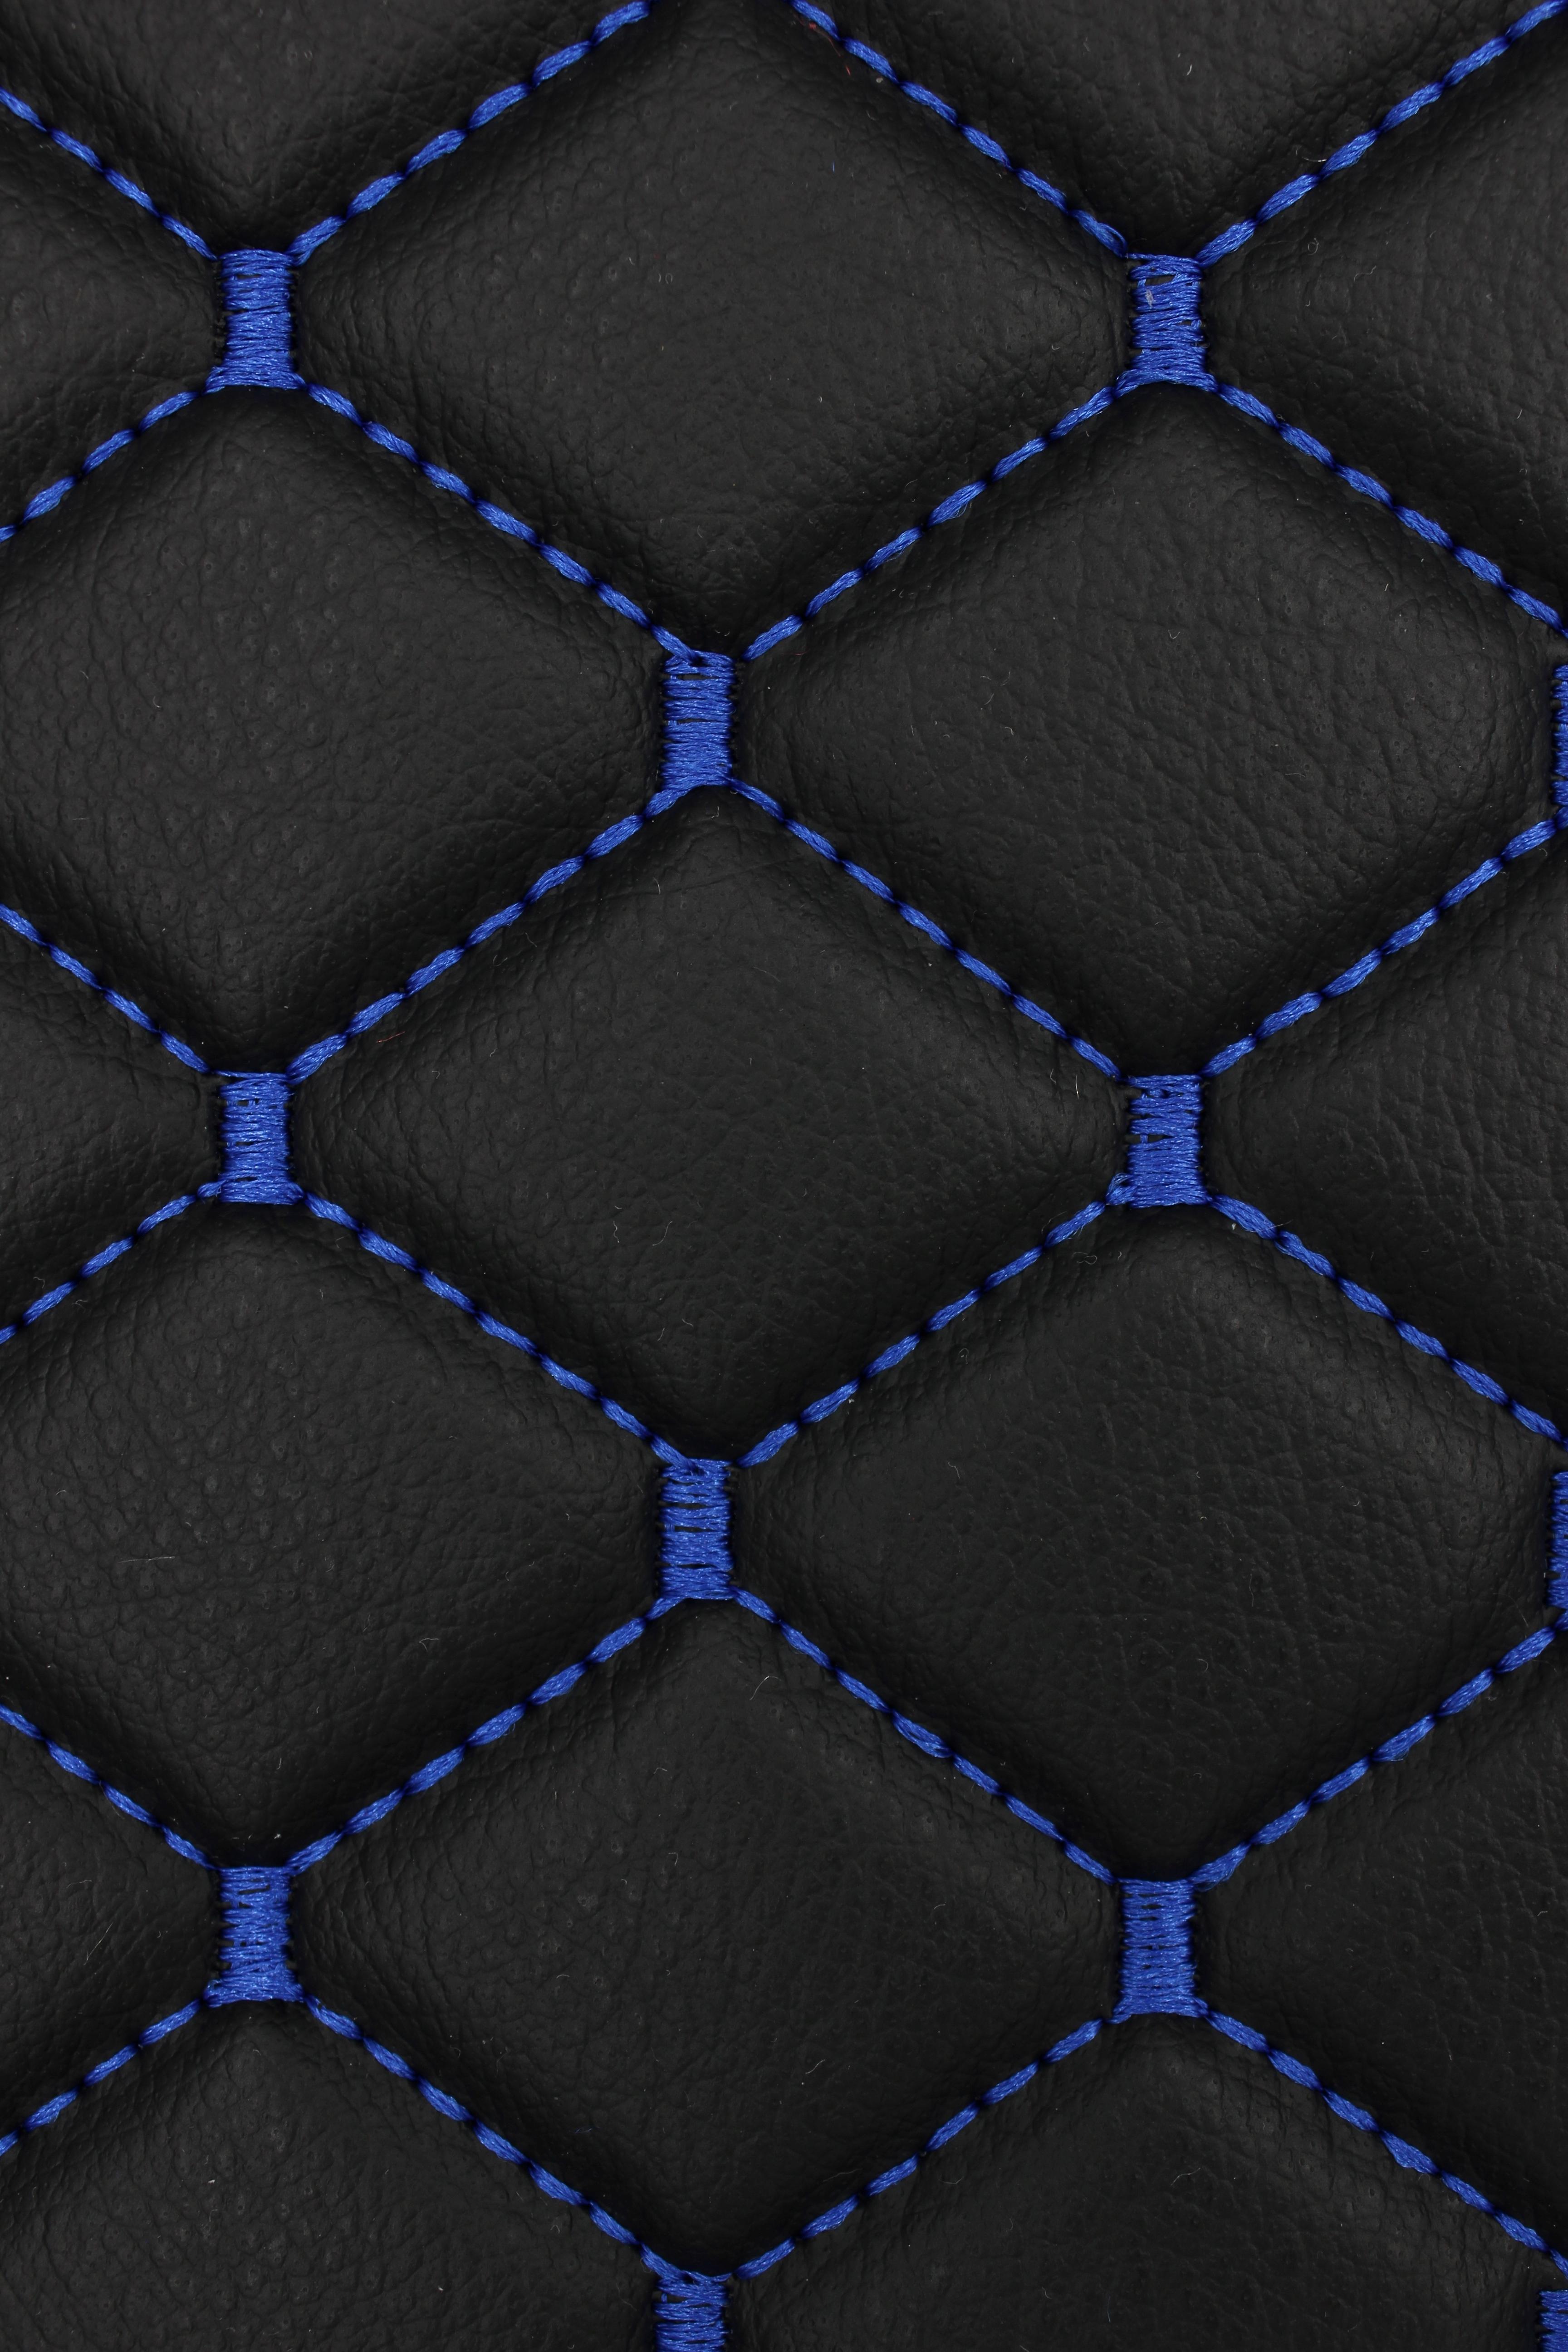 Blue Quilted Black Vinyl Faux Leather Car Upholstery Fabric | 2"x2" 5x5cm Diamond Stitch with 5mm Foam Backing | 140cm Wide | Automotive Projects